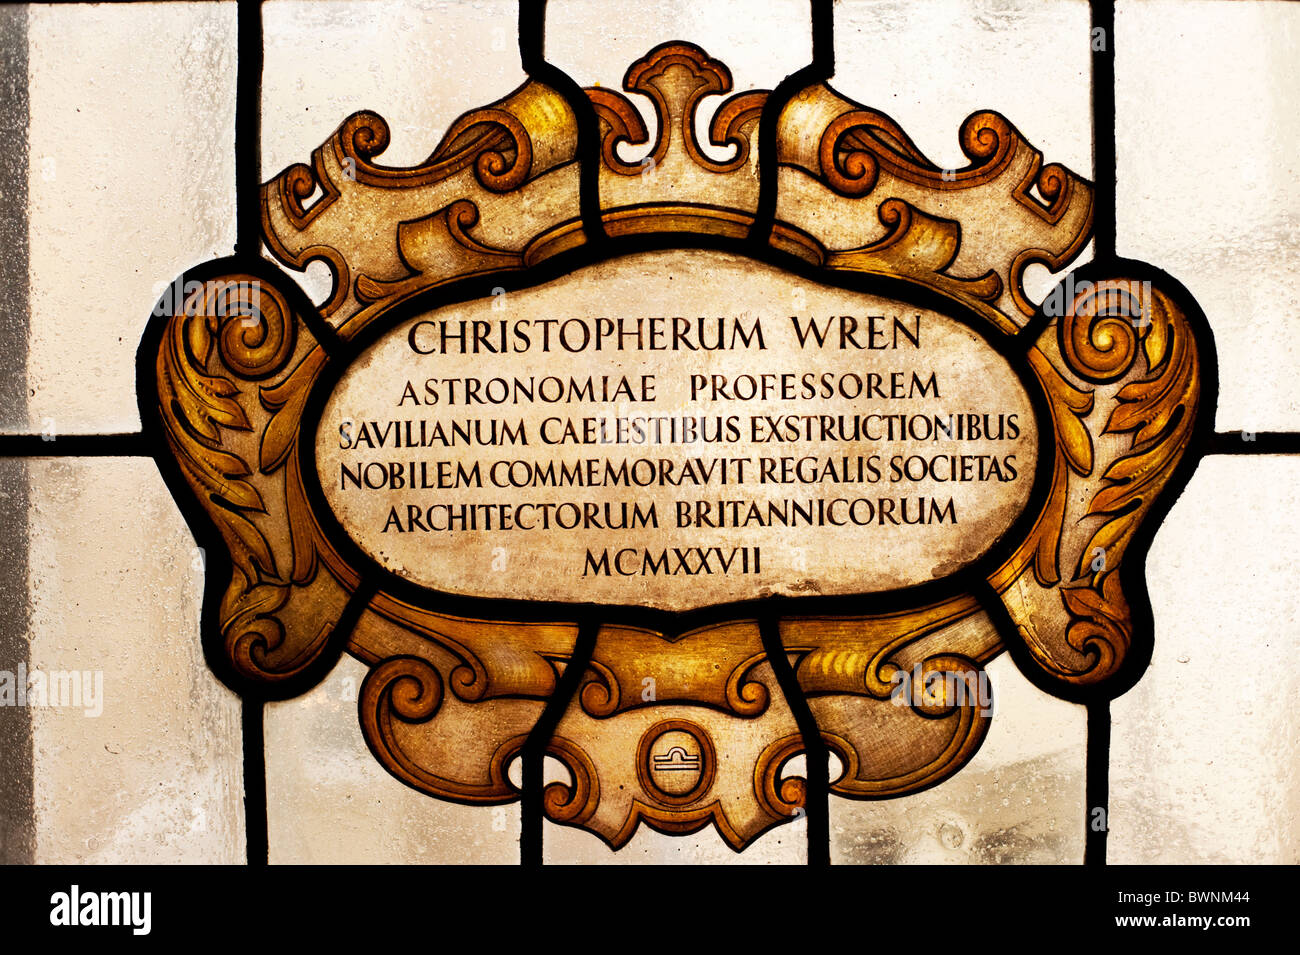 A lead glass window commemorating Christoper Wren at the Oxford Science museum. Stock Photo